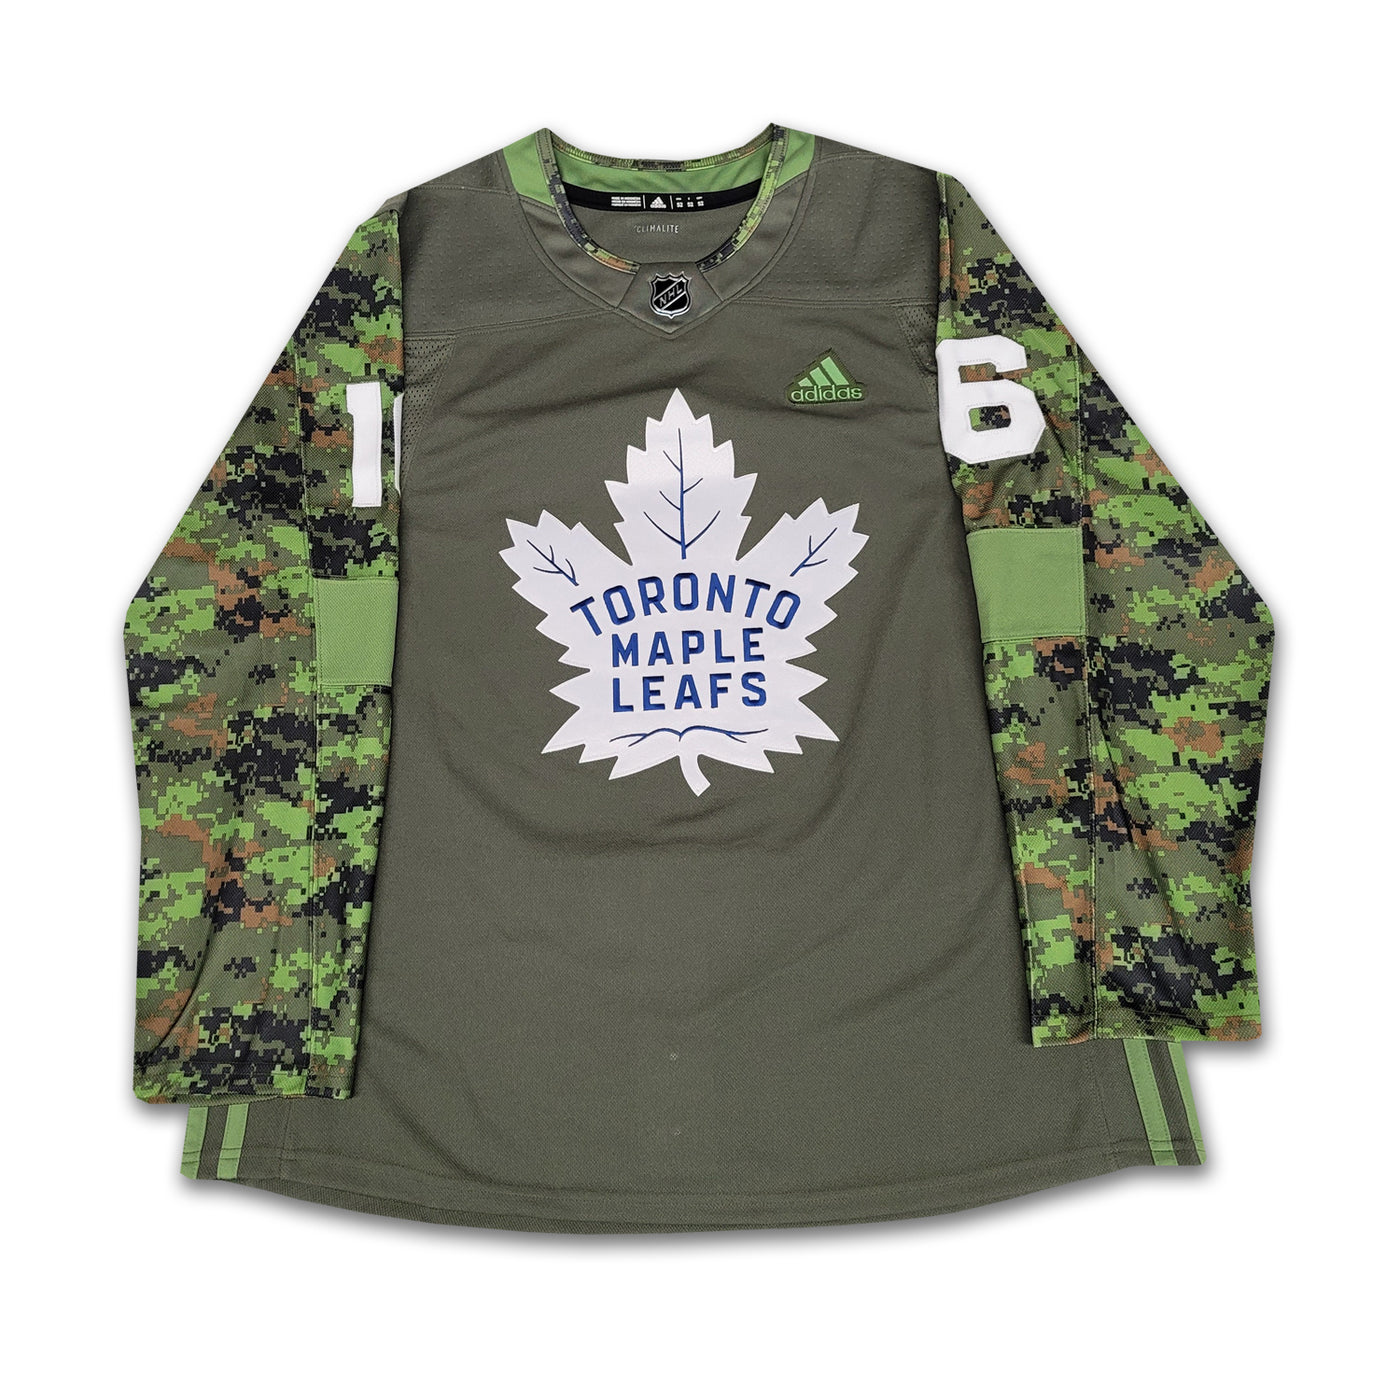 Mitch Marner Toronto Maple Leaf's Military Appreciation Night Autographed Authentic Adidas Jersey